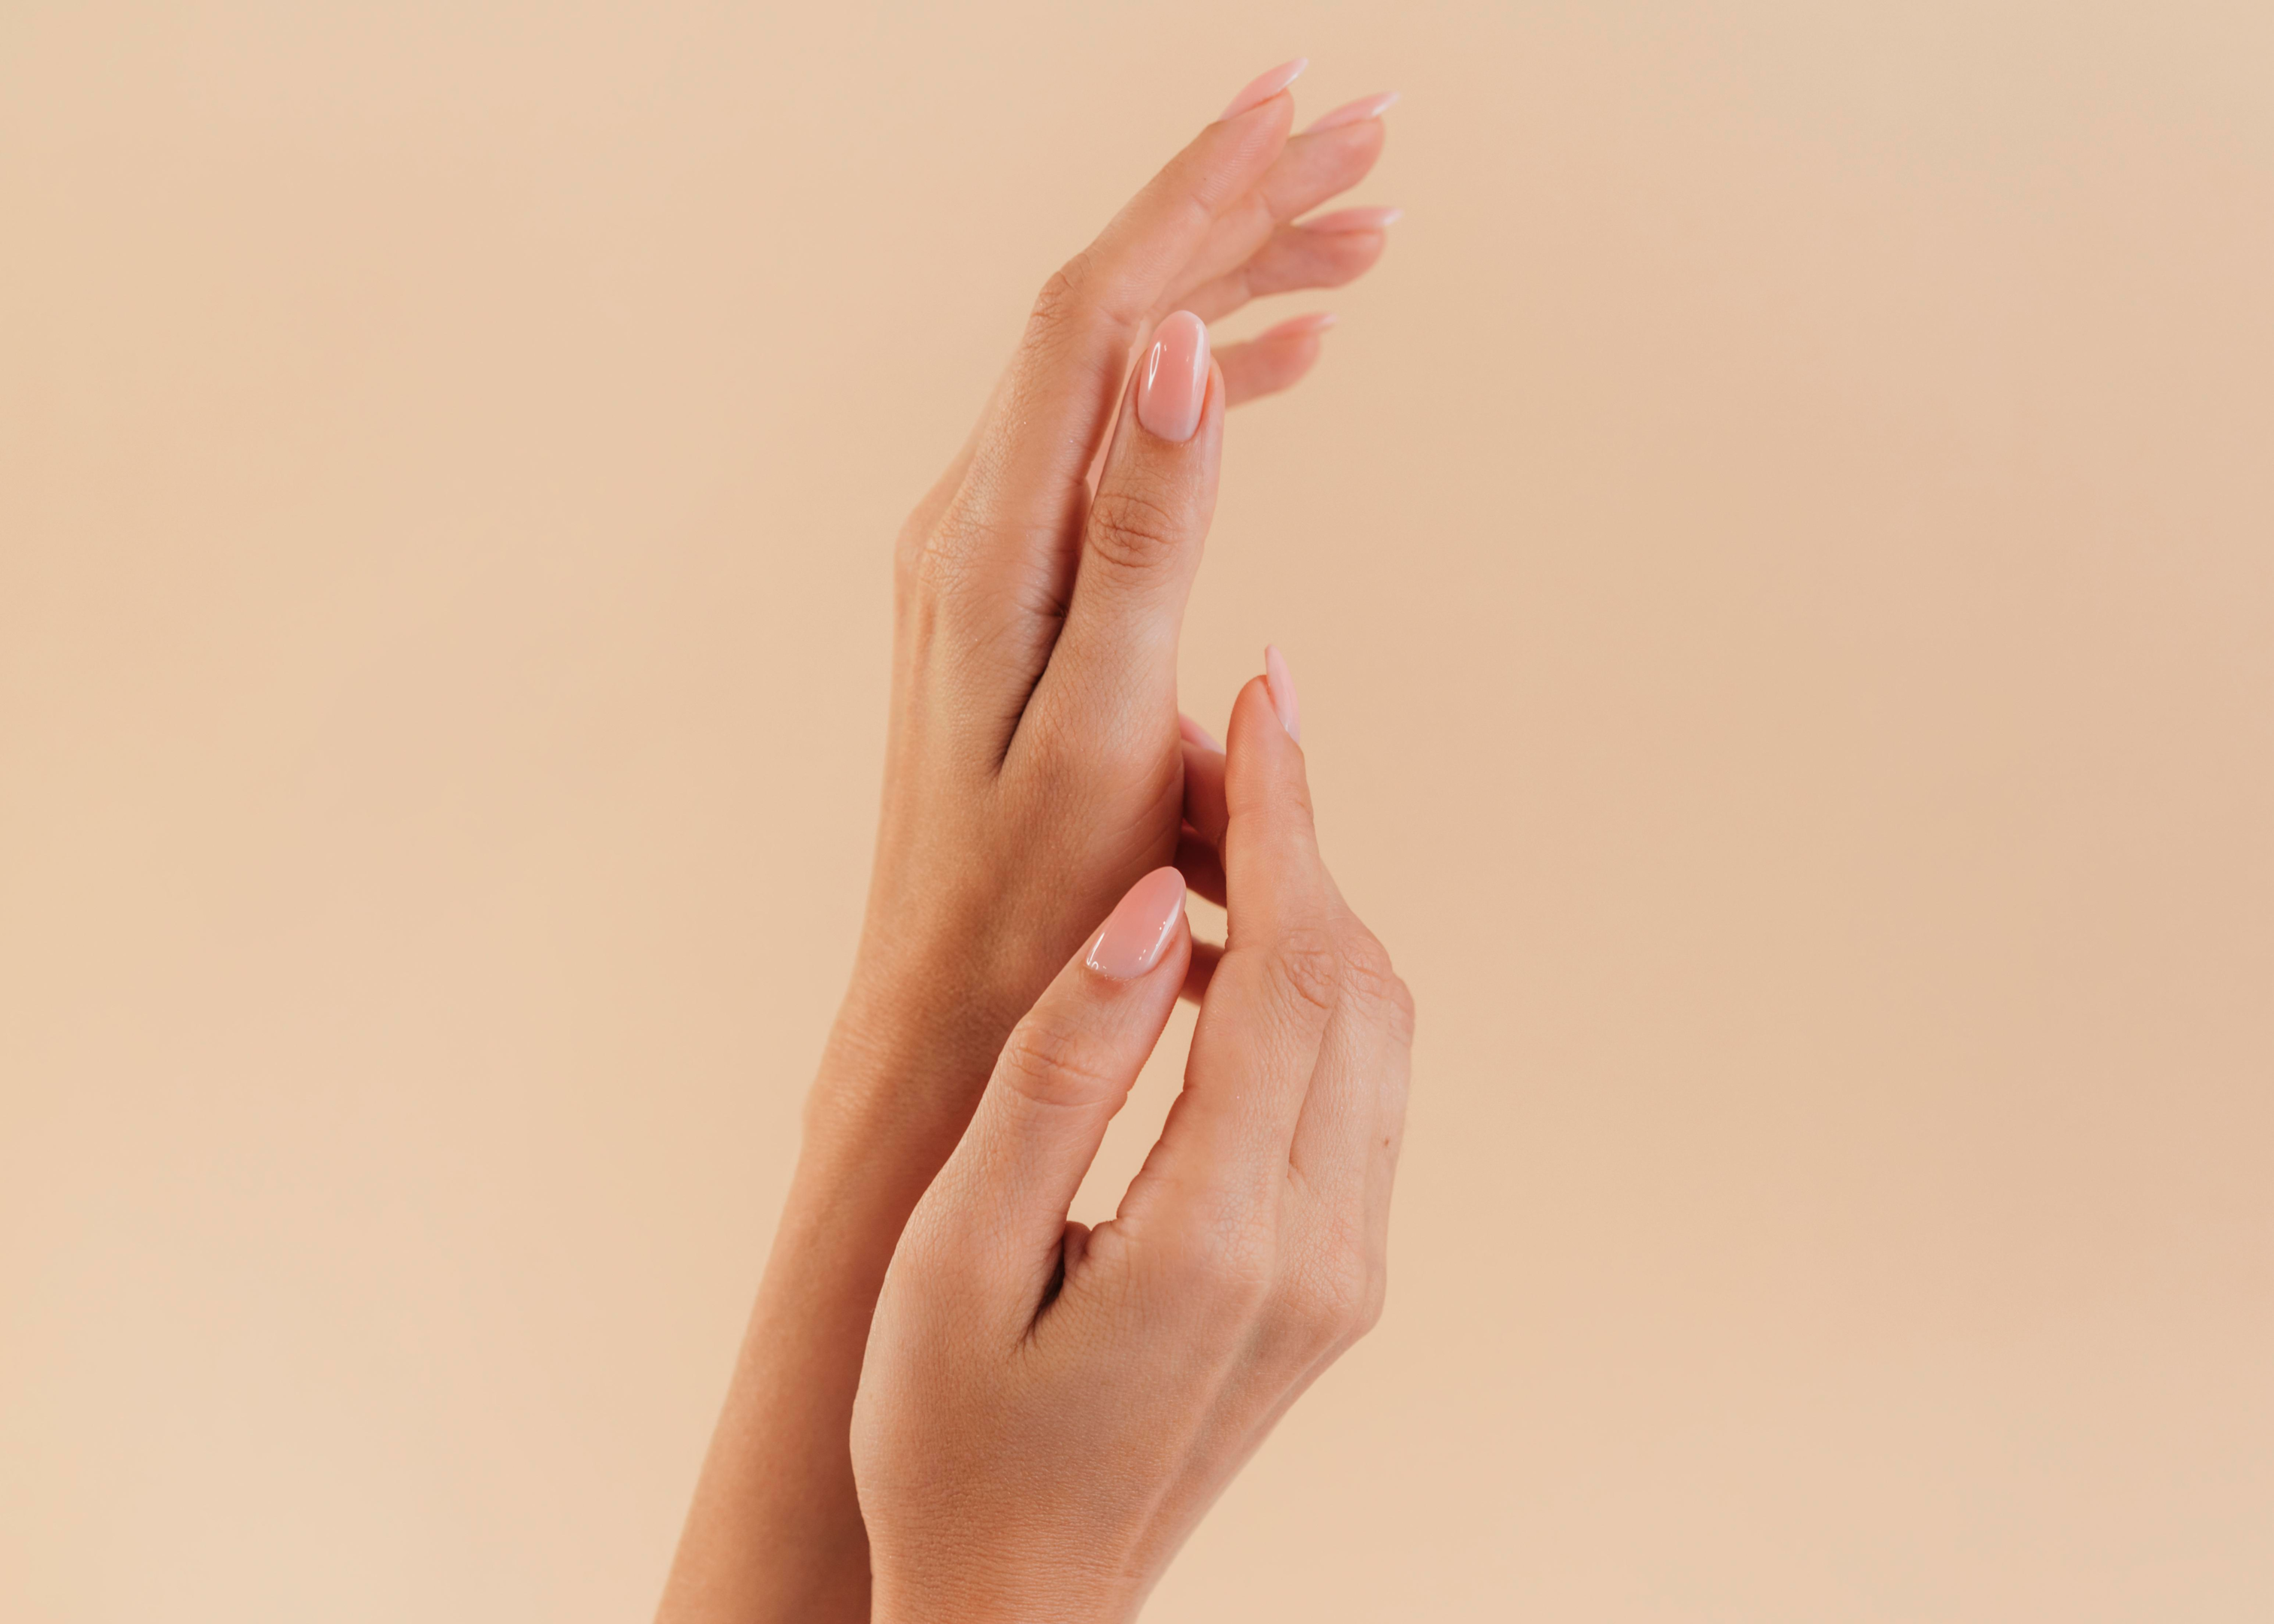 Why People Bite Their Nails - Nail-Biting Personality Trait